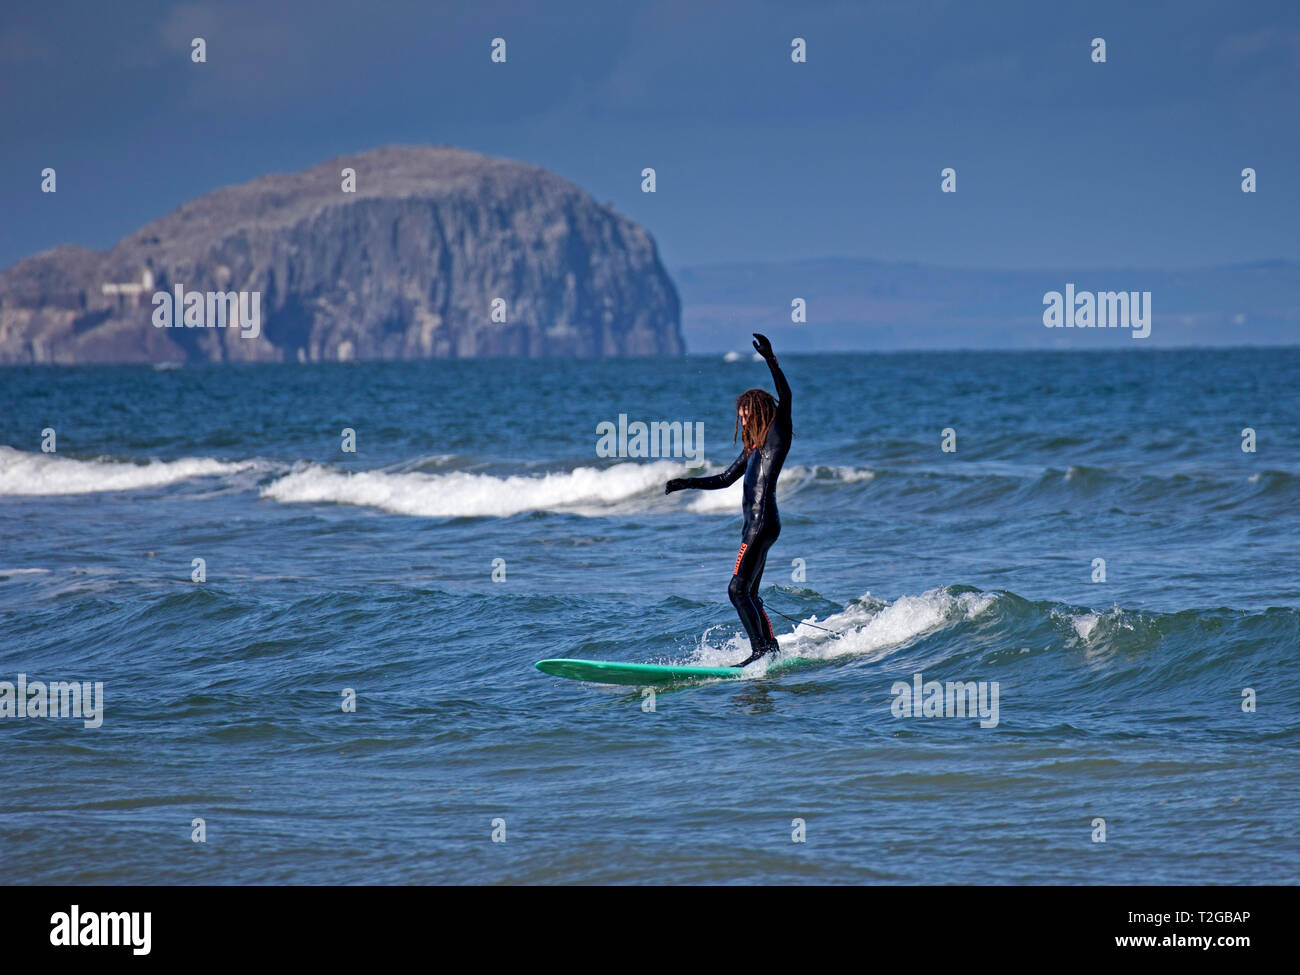 Surfers at Belhaven Bay with Bass Rock in background, Dunbar, Scotland, UK, Europe Stock Photo